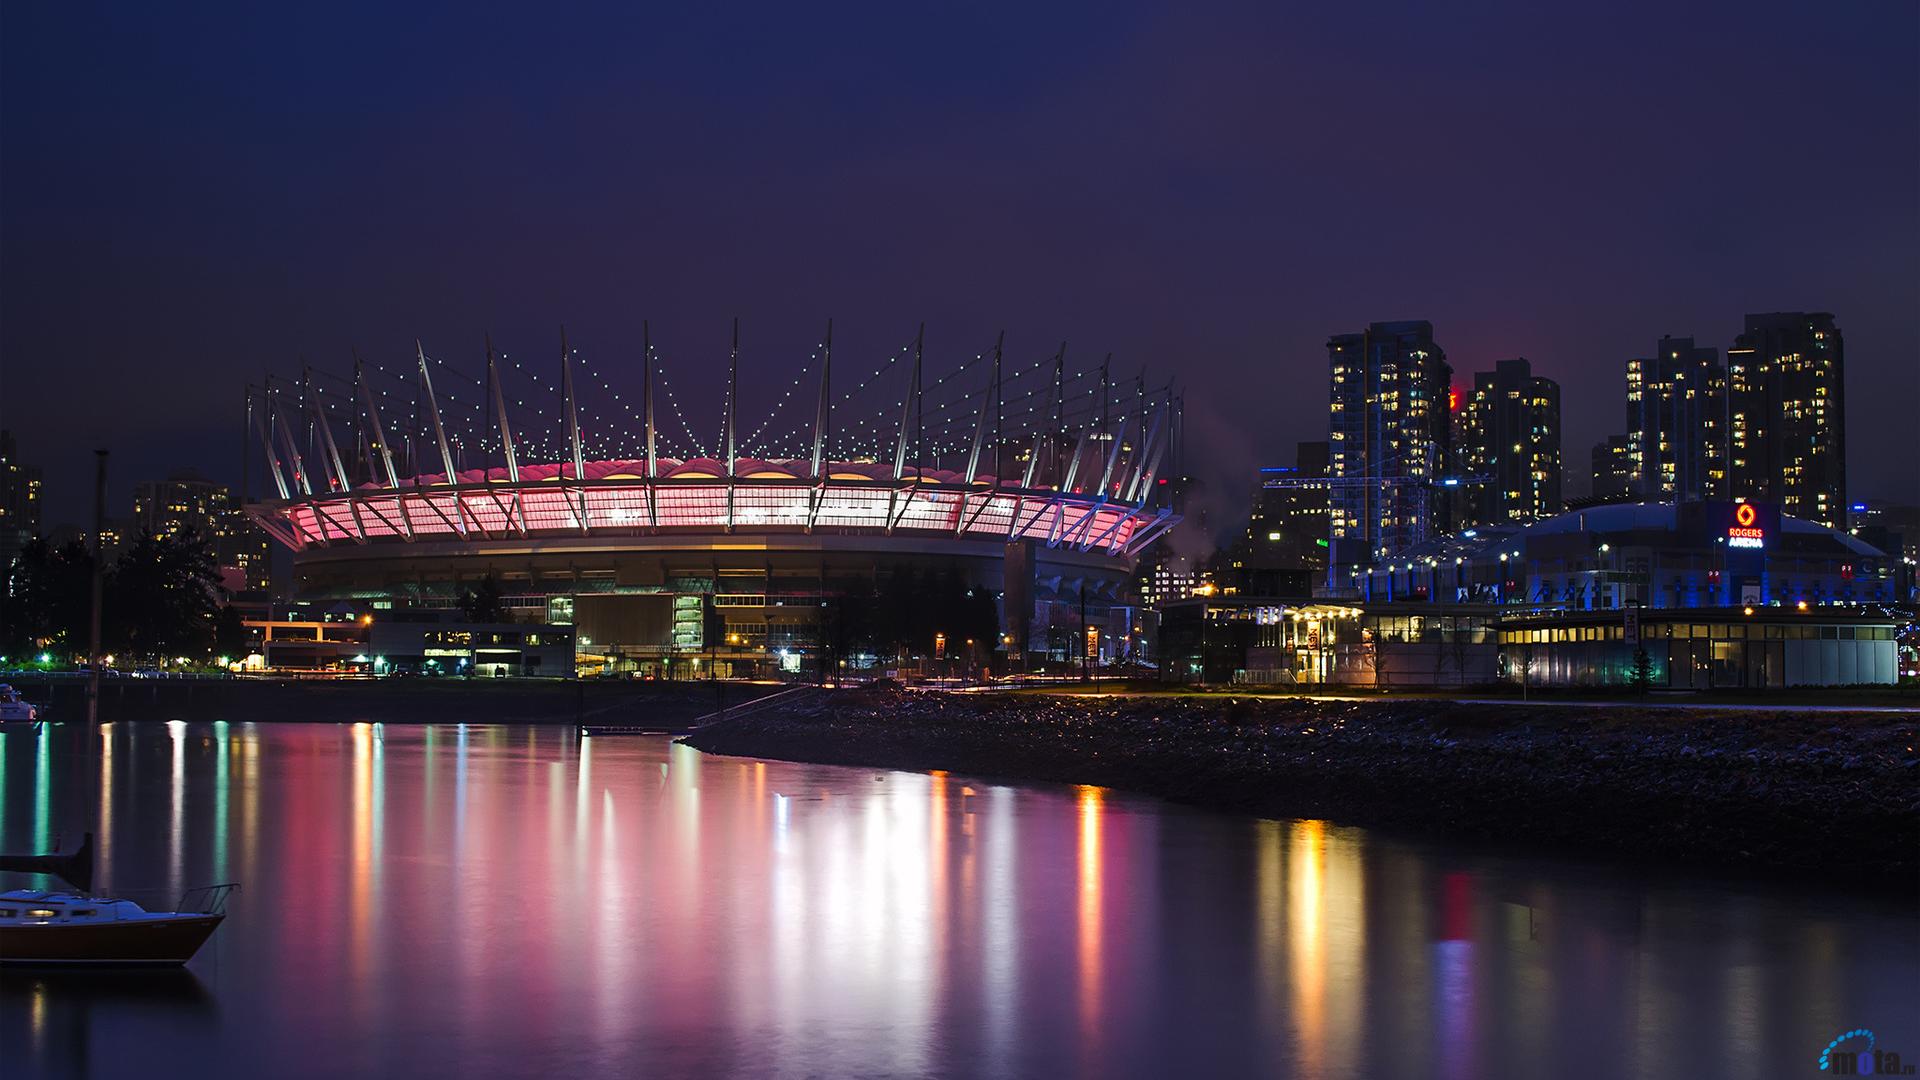 Download Wallpaper Stadium BC Place in Vancouver 1920 x 1080 HDTV